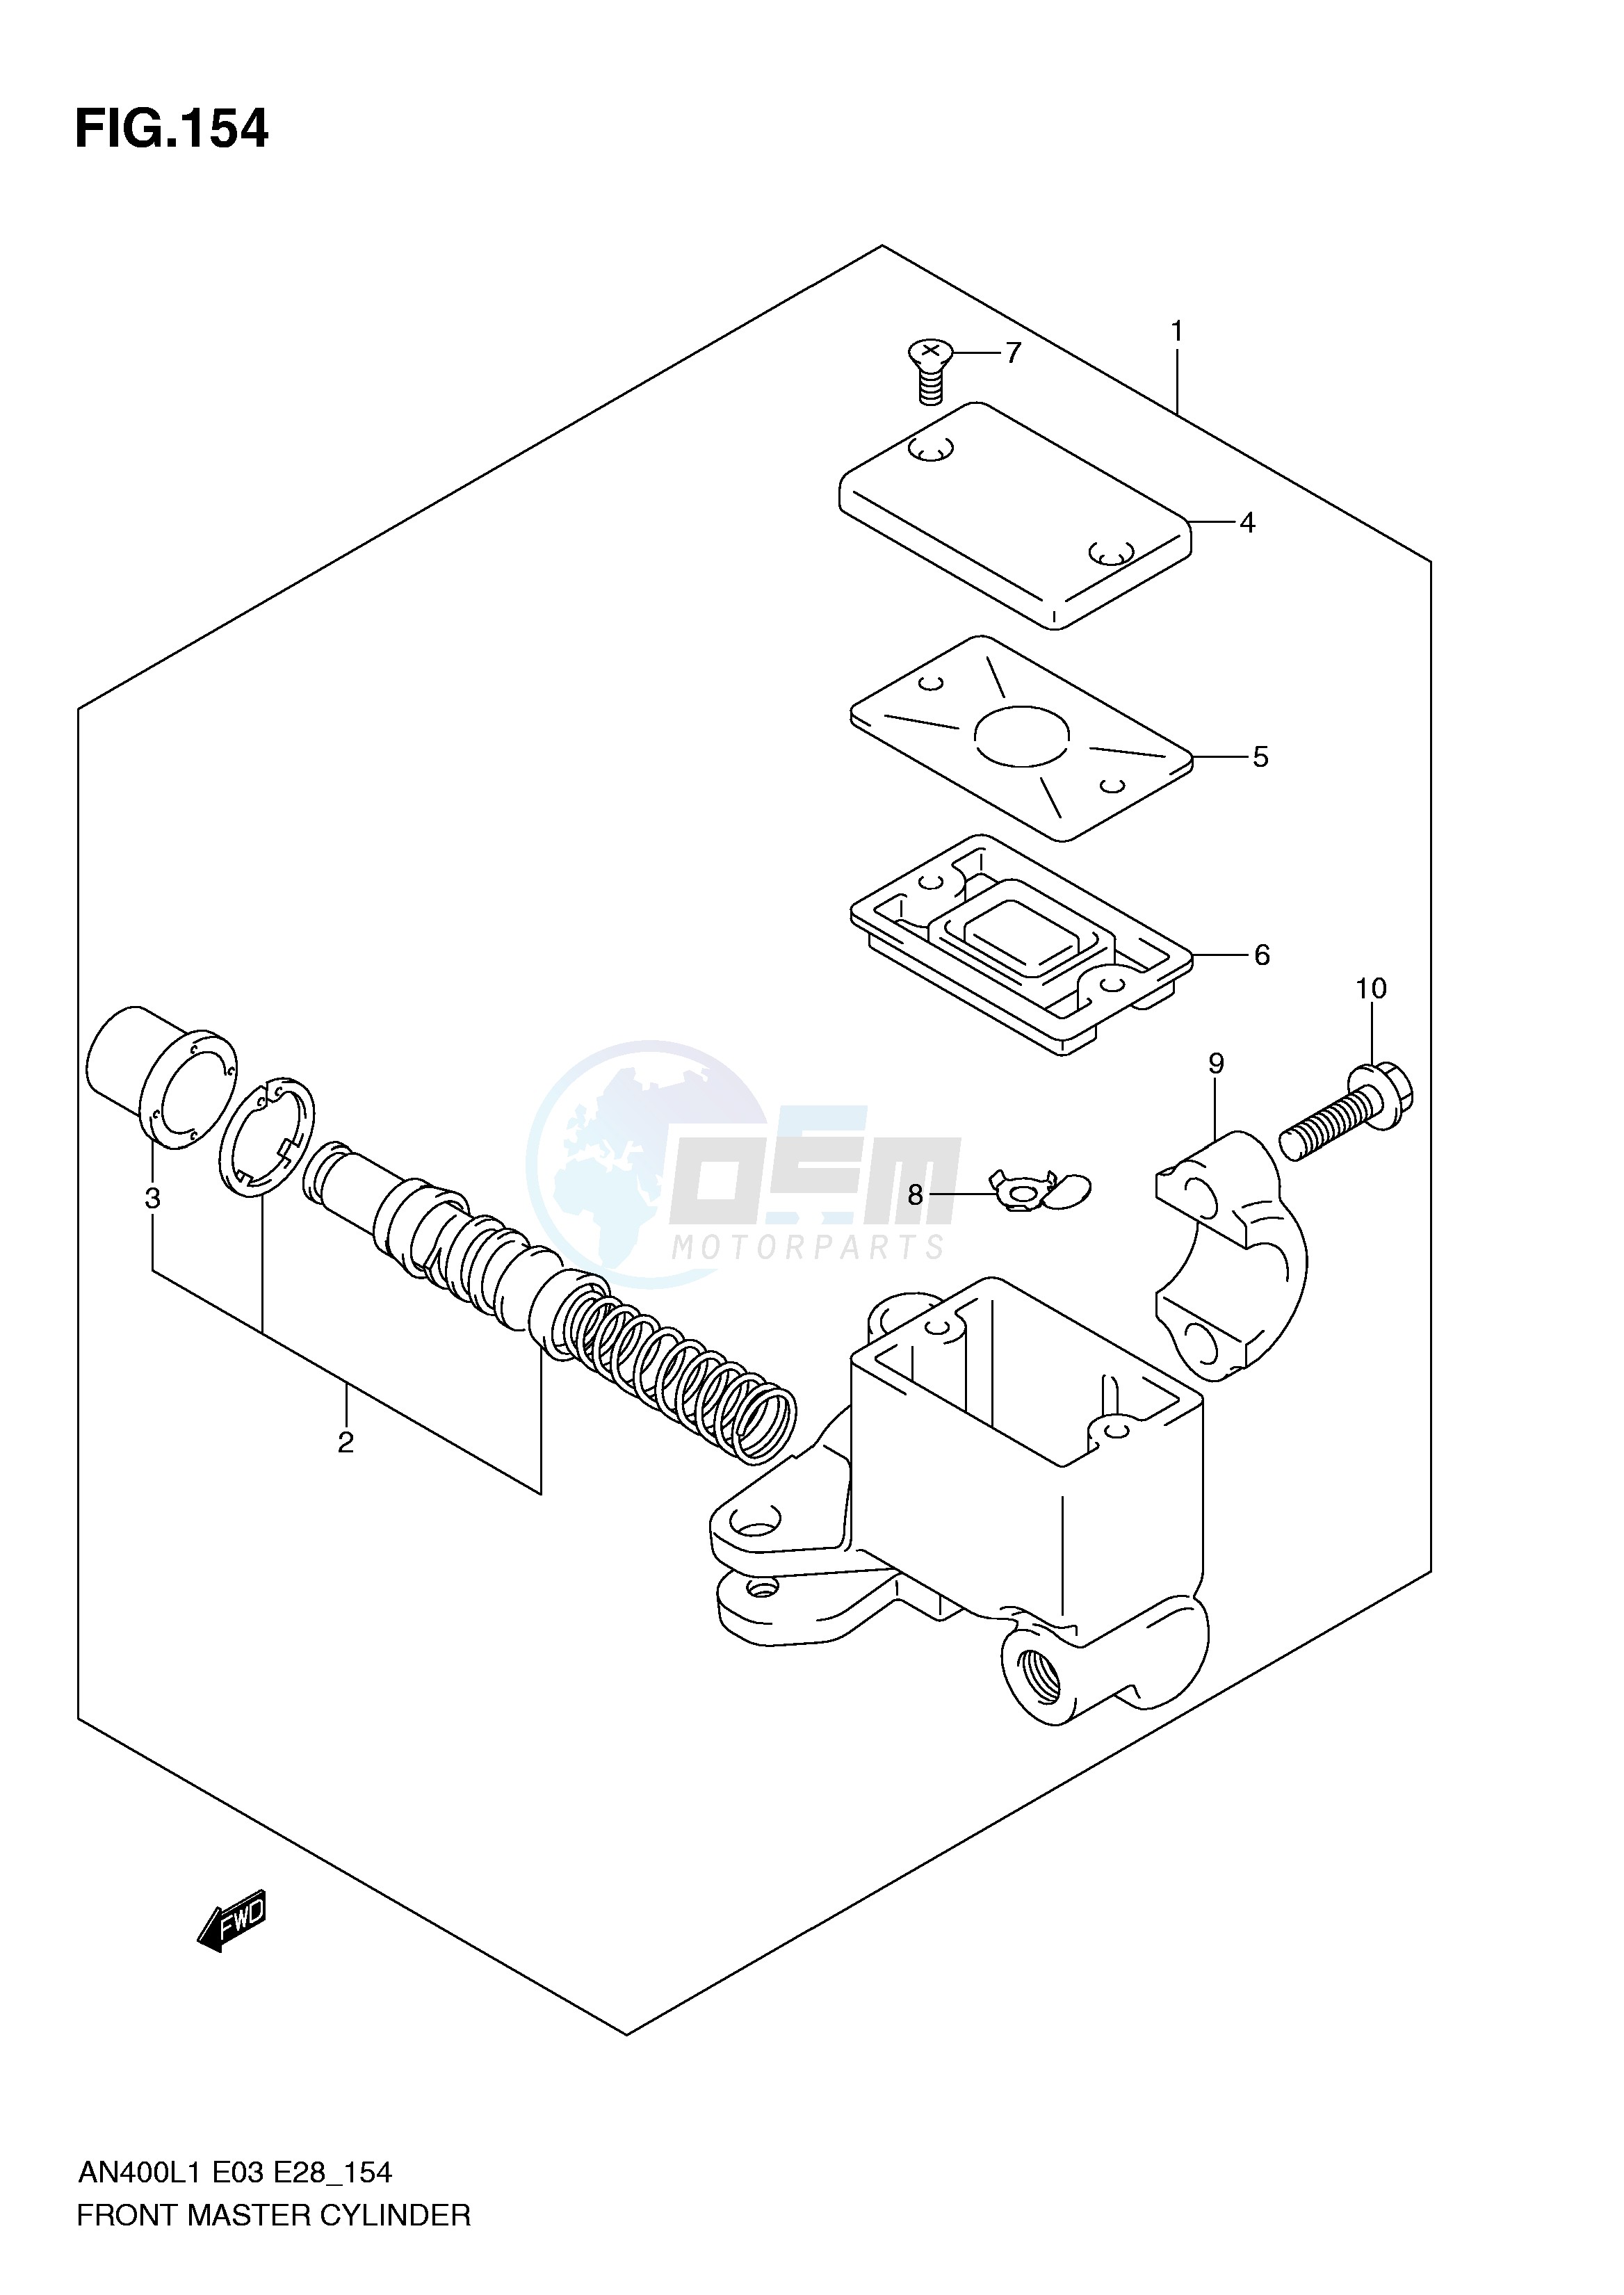 FRONT MASTER CYLINDER (AN400L1 E33) image